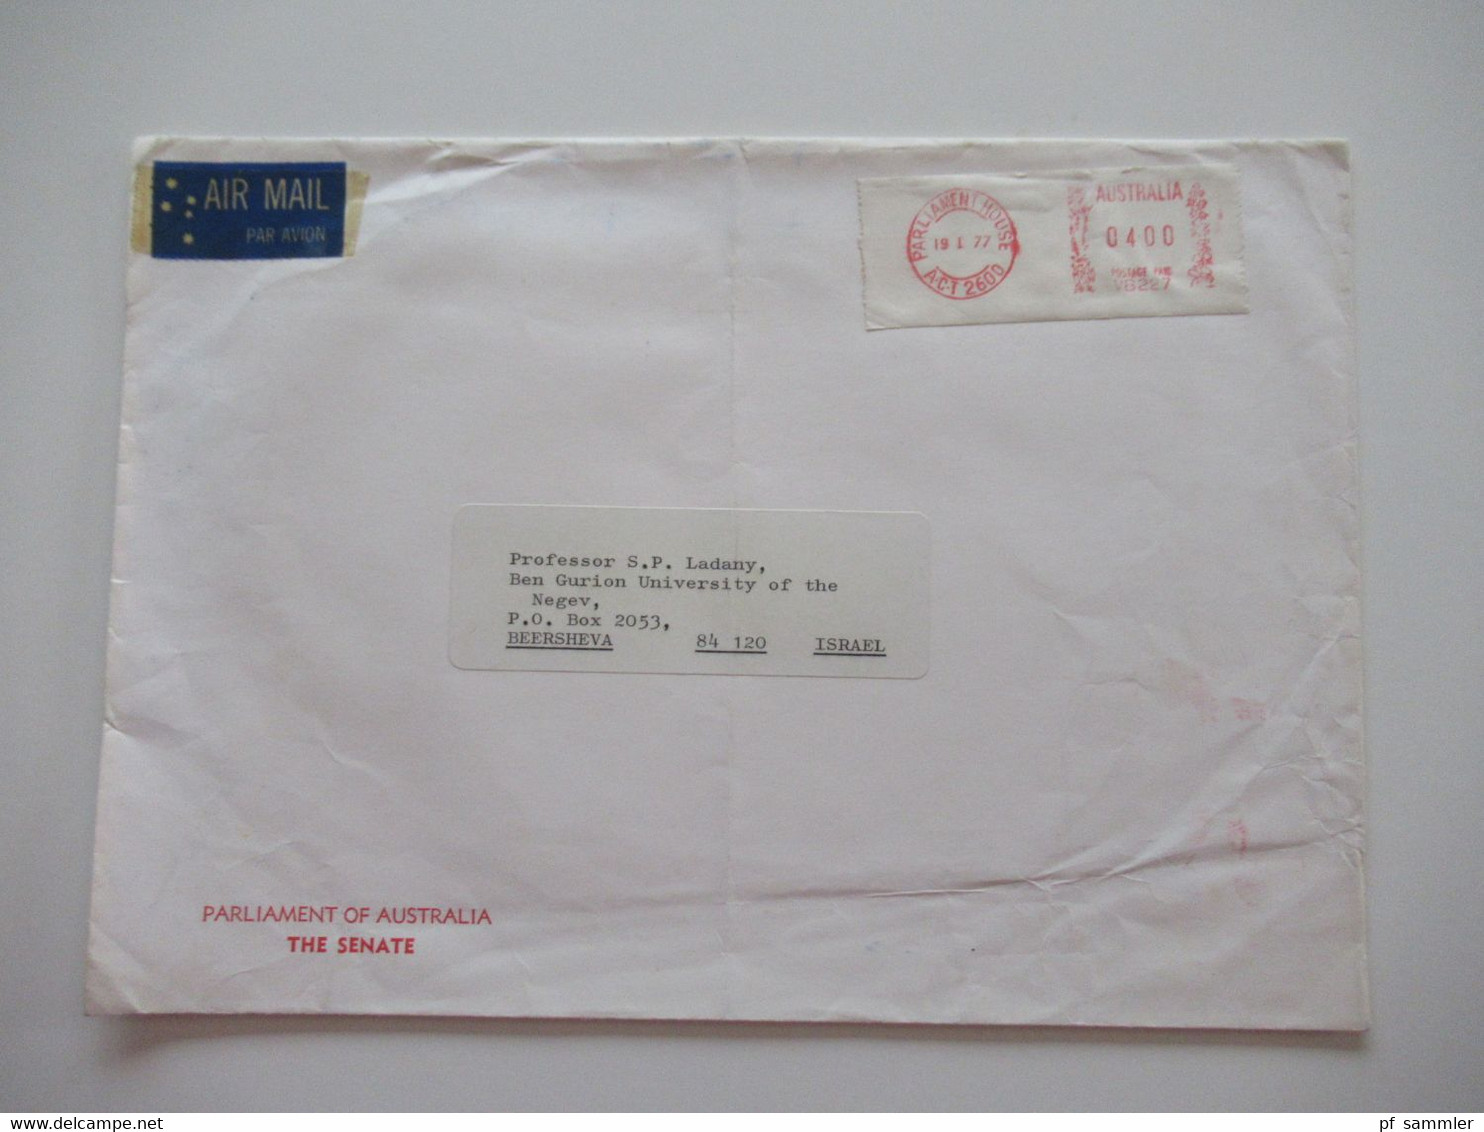 Australien 1977 Air Mail Nach Israel Umschlag Parliament Of Australia The Senate Postage Paid Parliament House ACT 2600 - Lettres & Documents